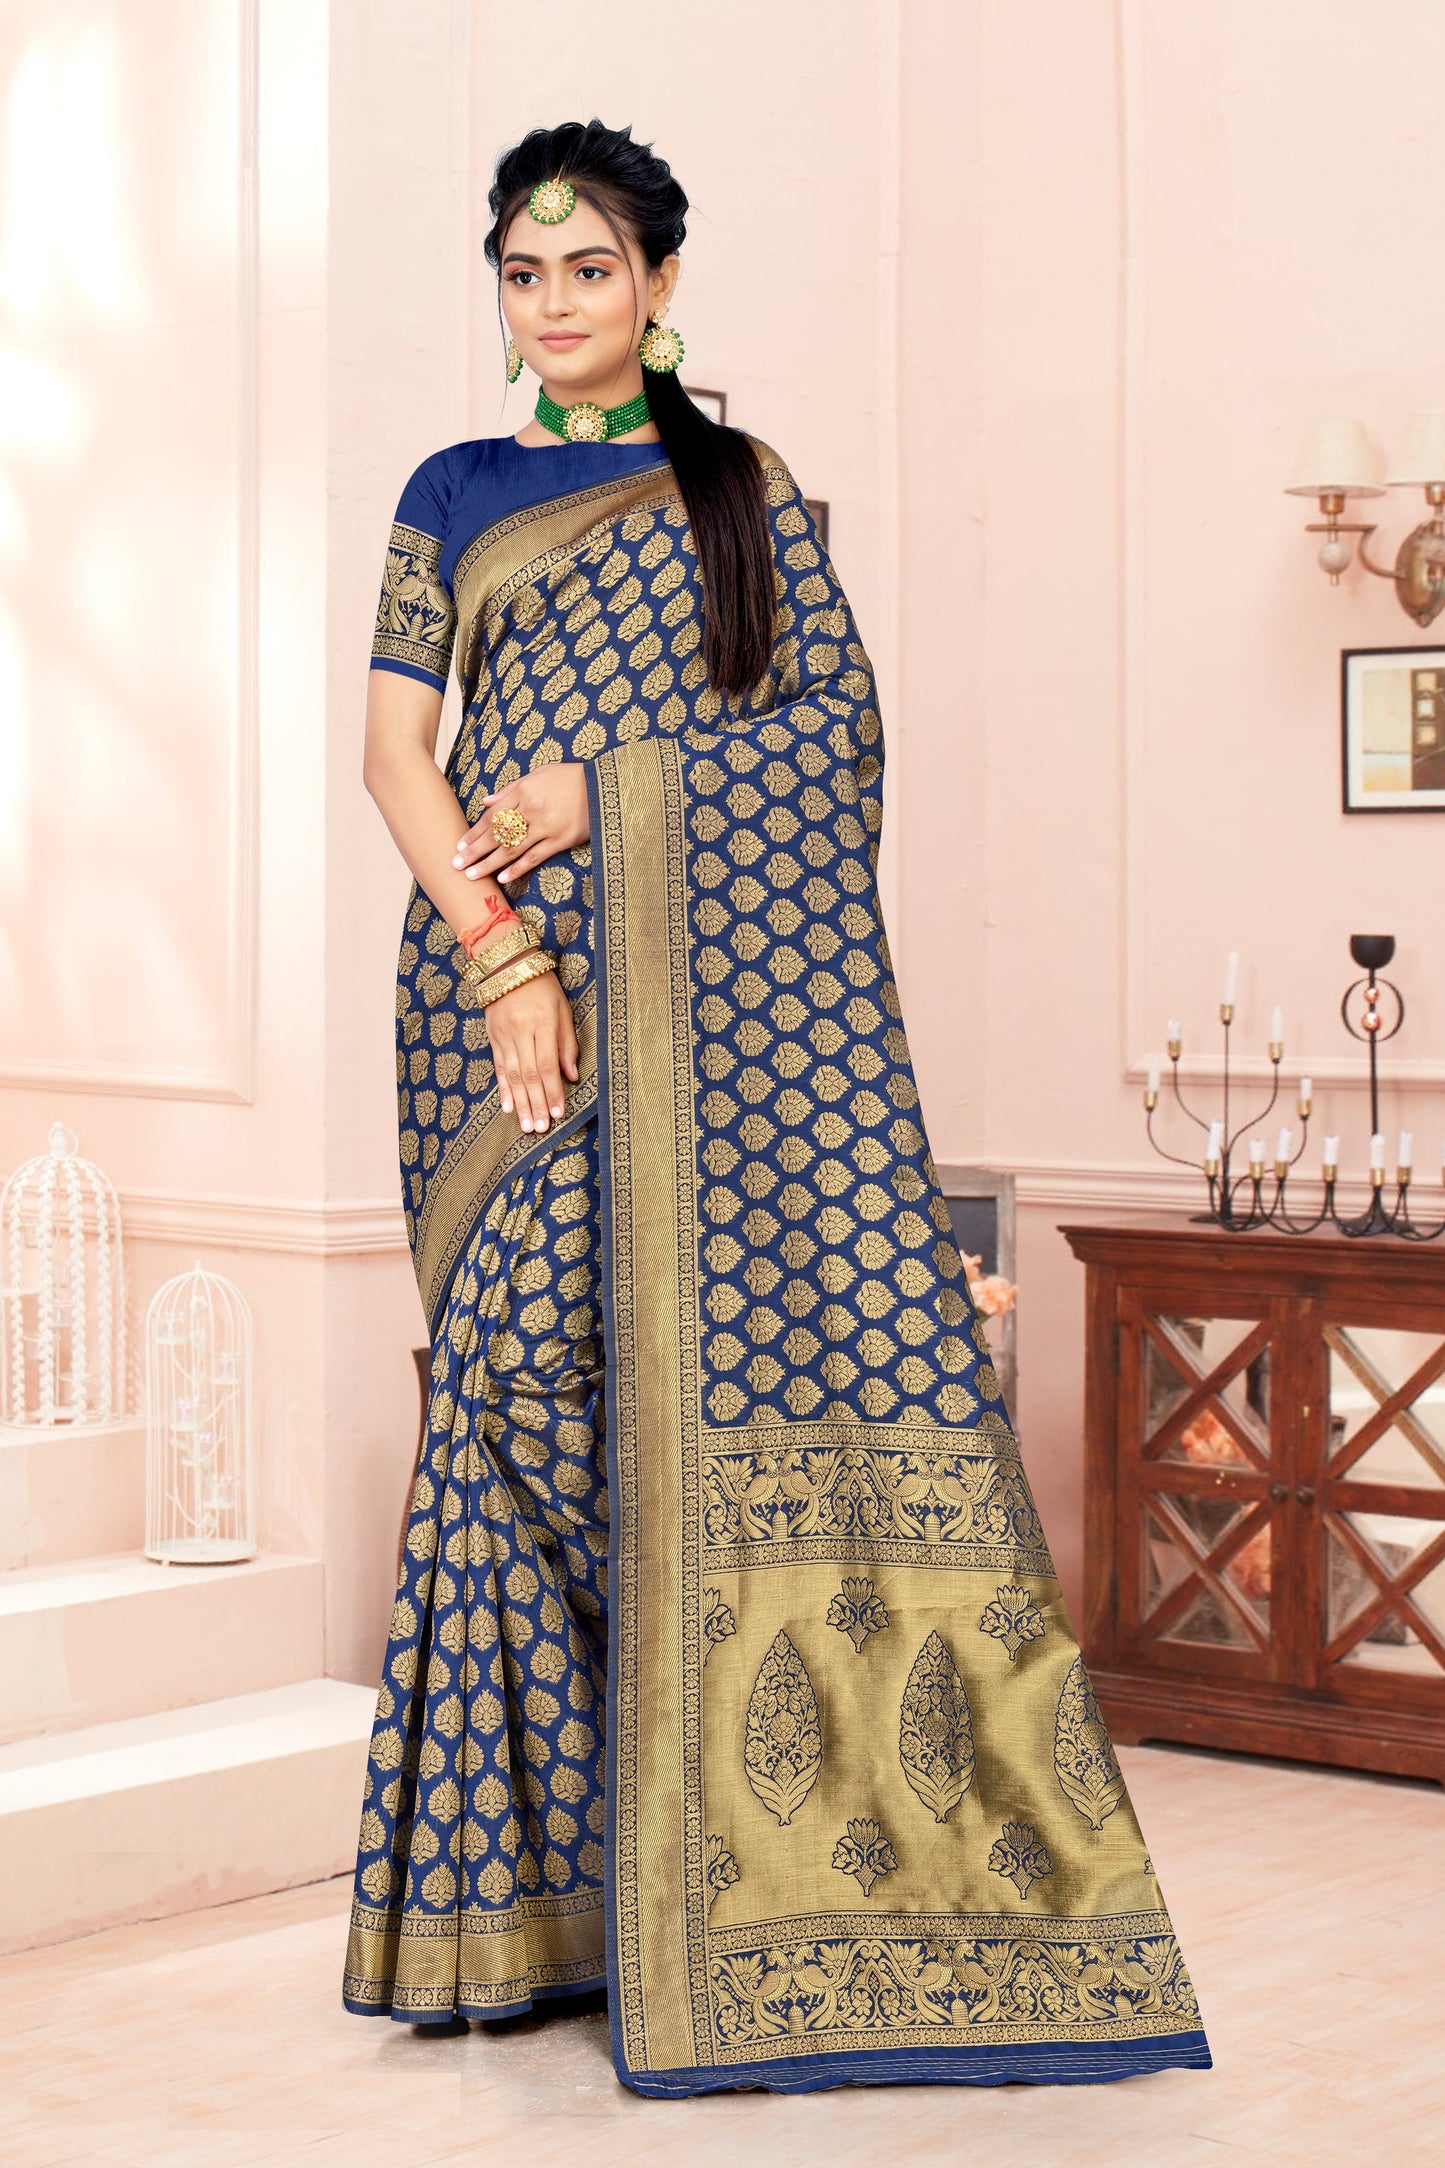 FASHION BOOMS ROYAL BLUE BANARSI SILK TRADITIONAL SAREE FOR WHOLE FAMILY TO WEAR ON ANY OCCASION .